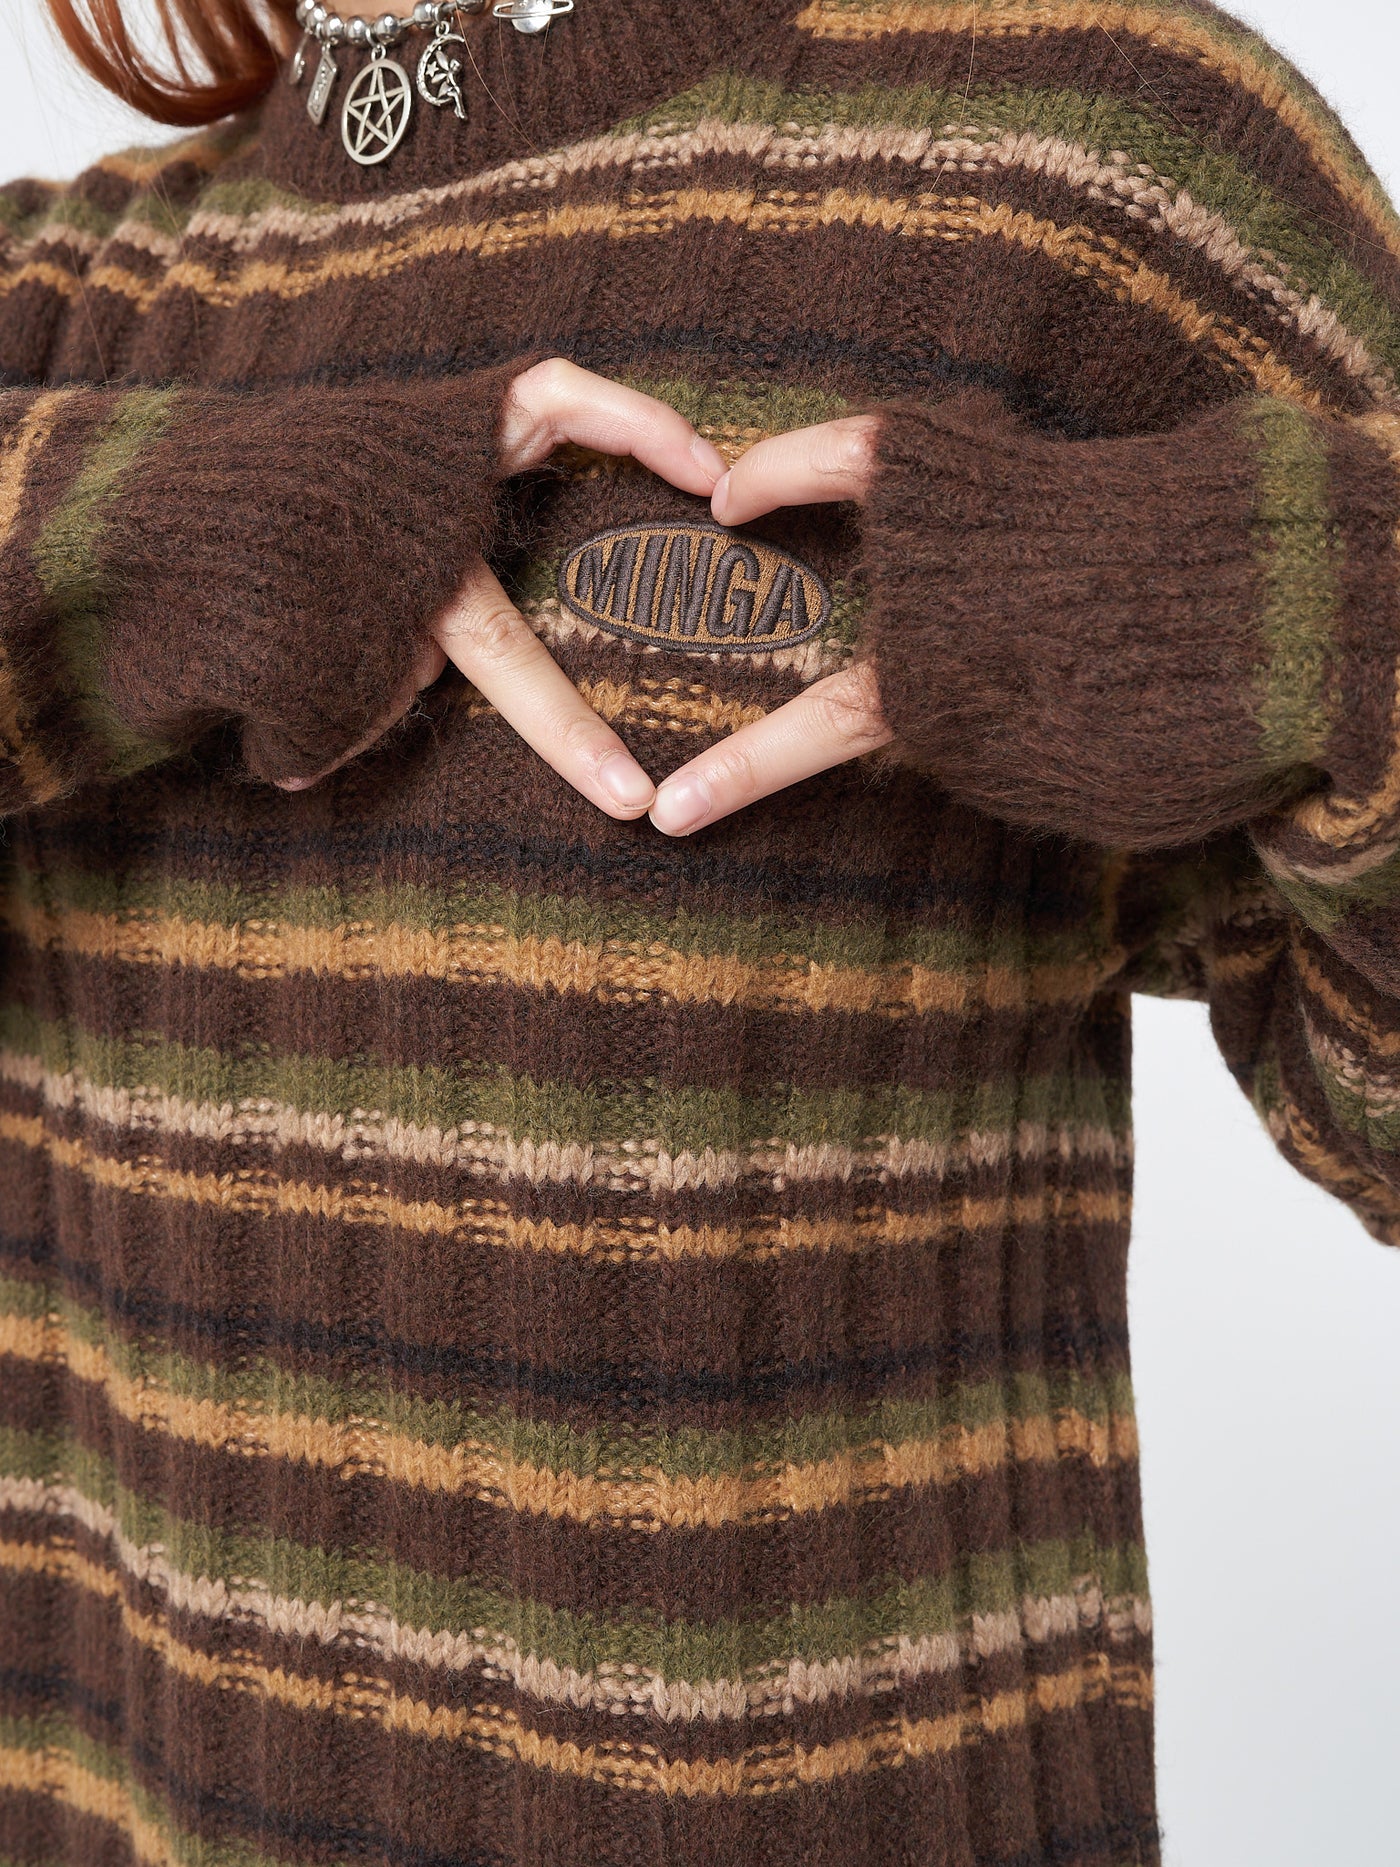 Chunky striped knit jumper with brown, green and honey stripes